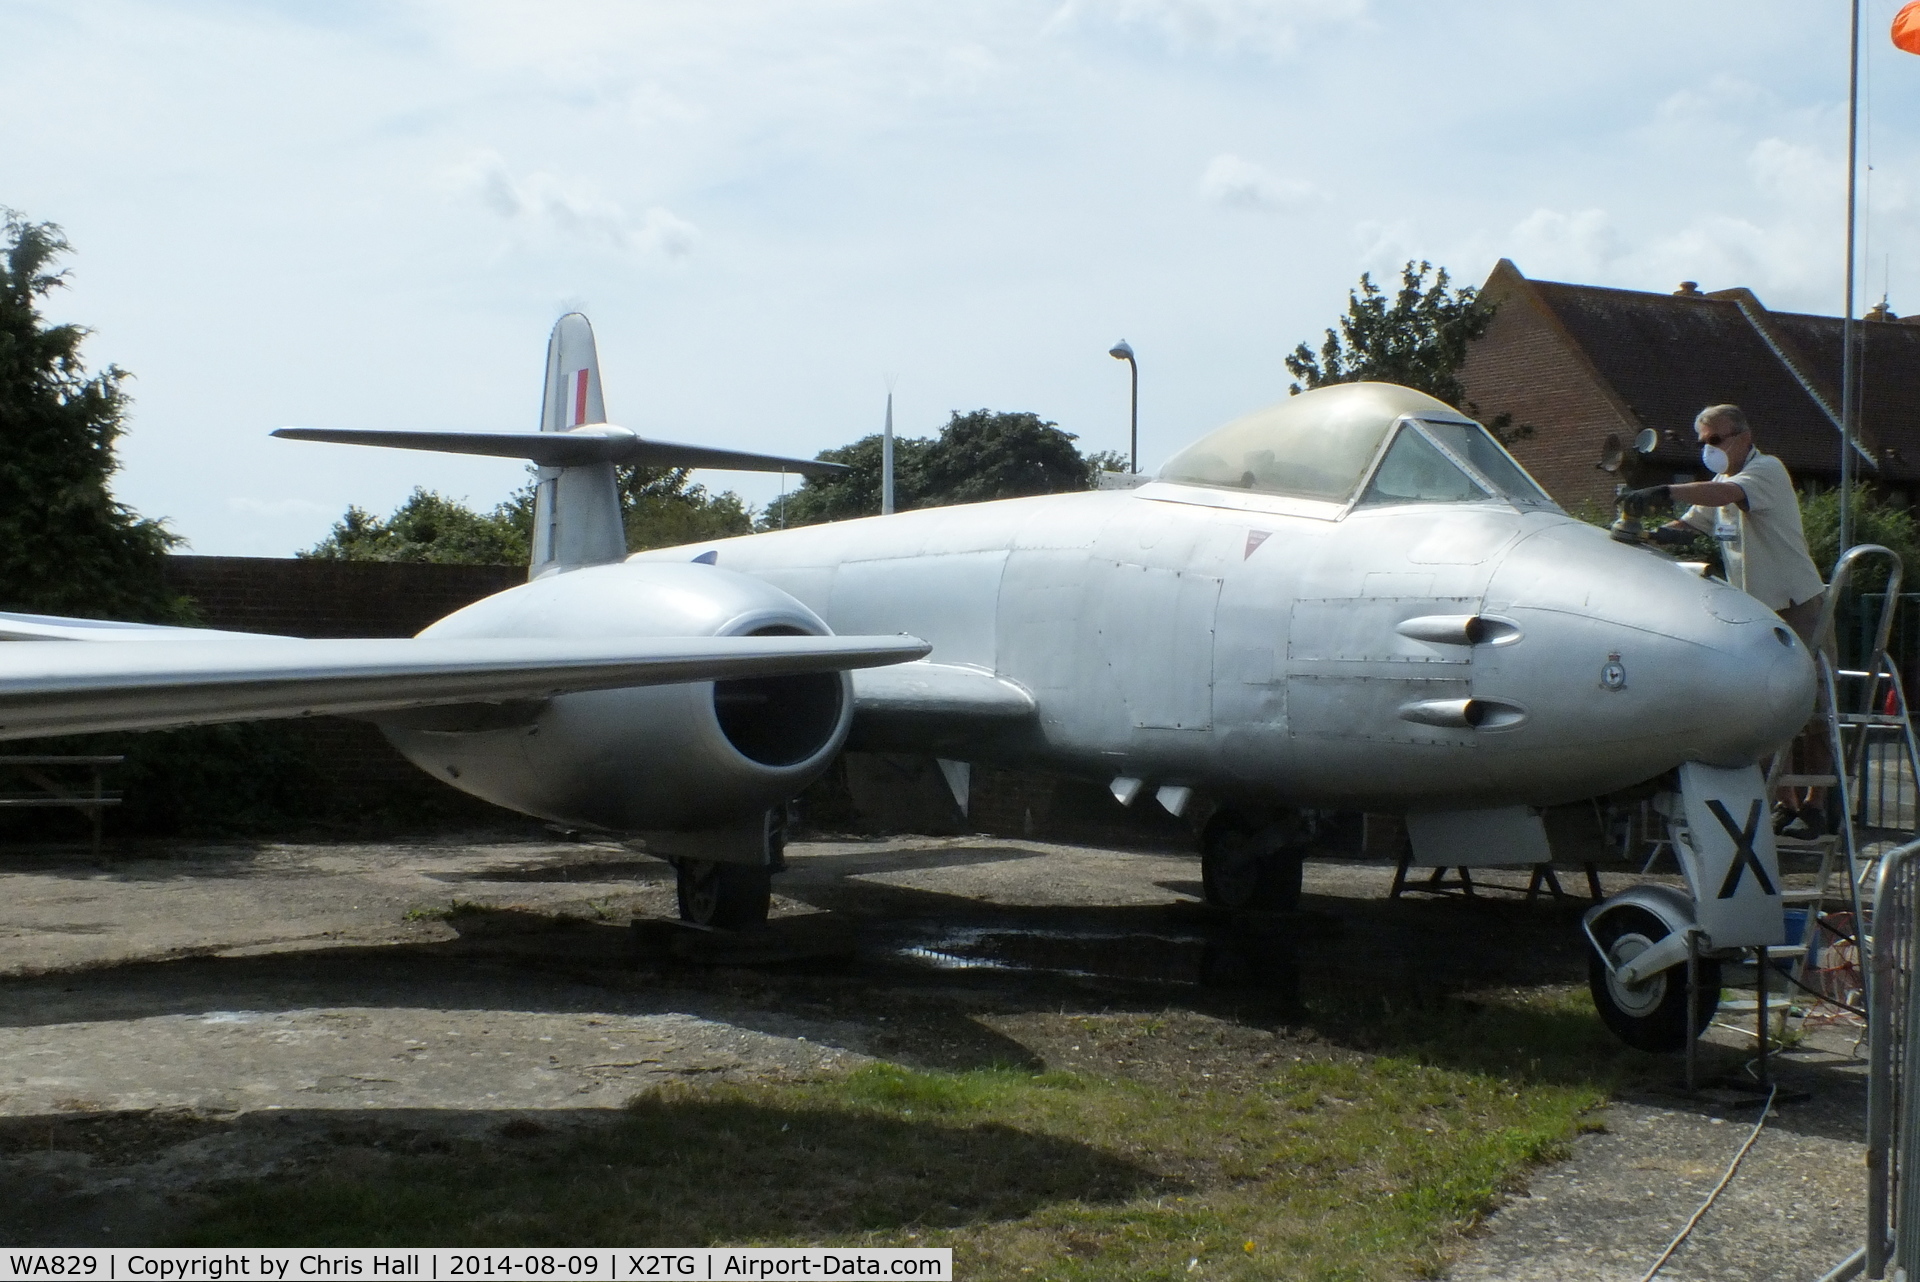 WA829, Gloster Meteor F.8 C/N Not found WA829, at the Tangmere Military Aviation Museum